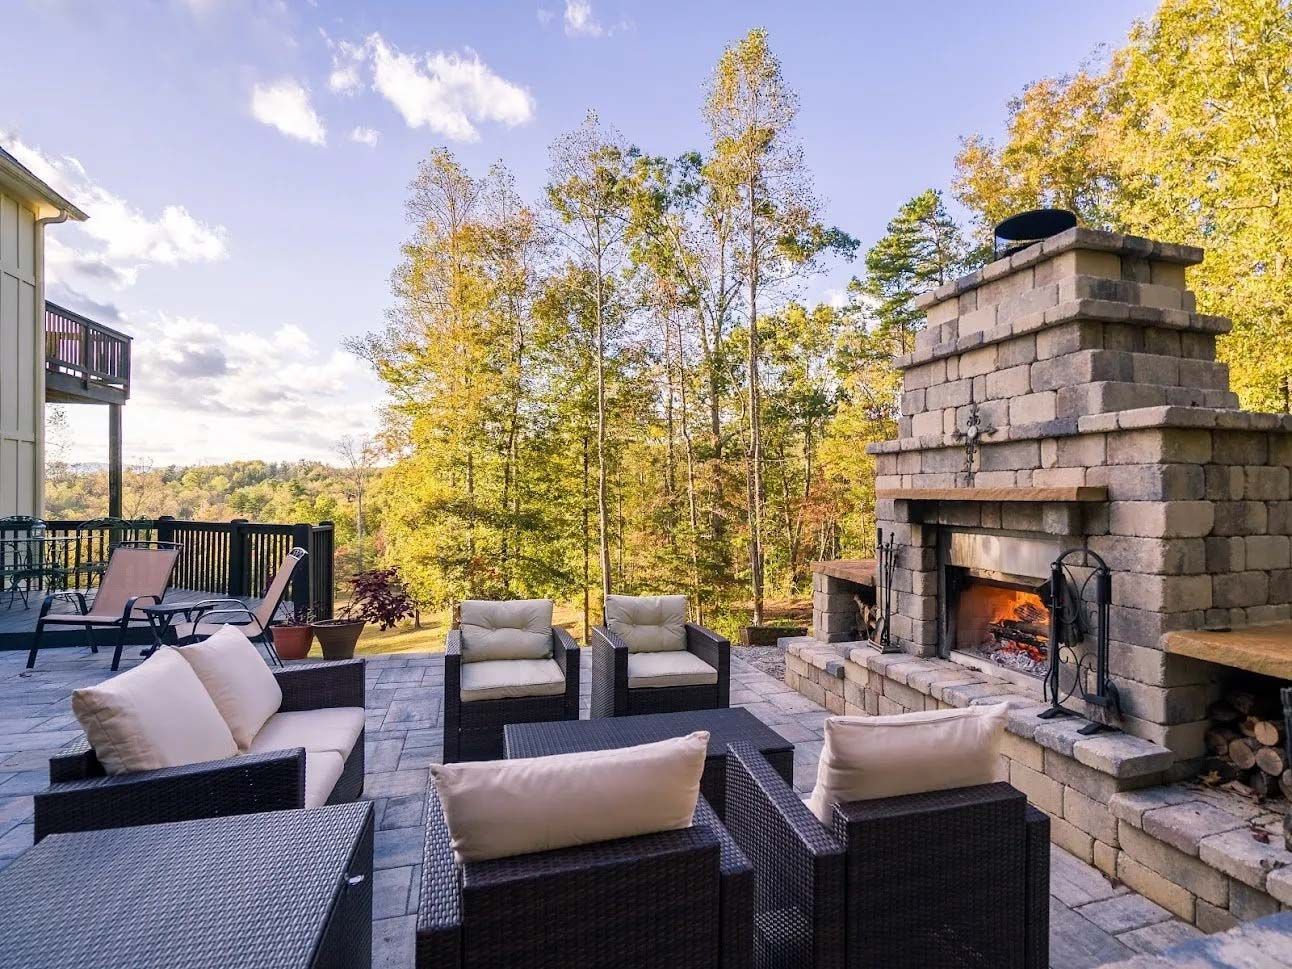 3 Factors to Consider When Designing an Outdoor Fireplace